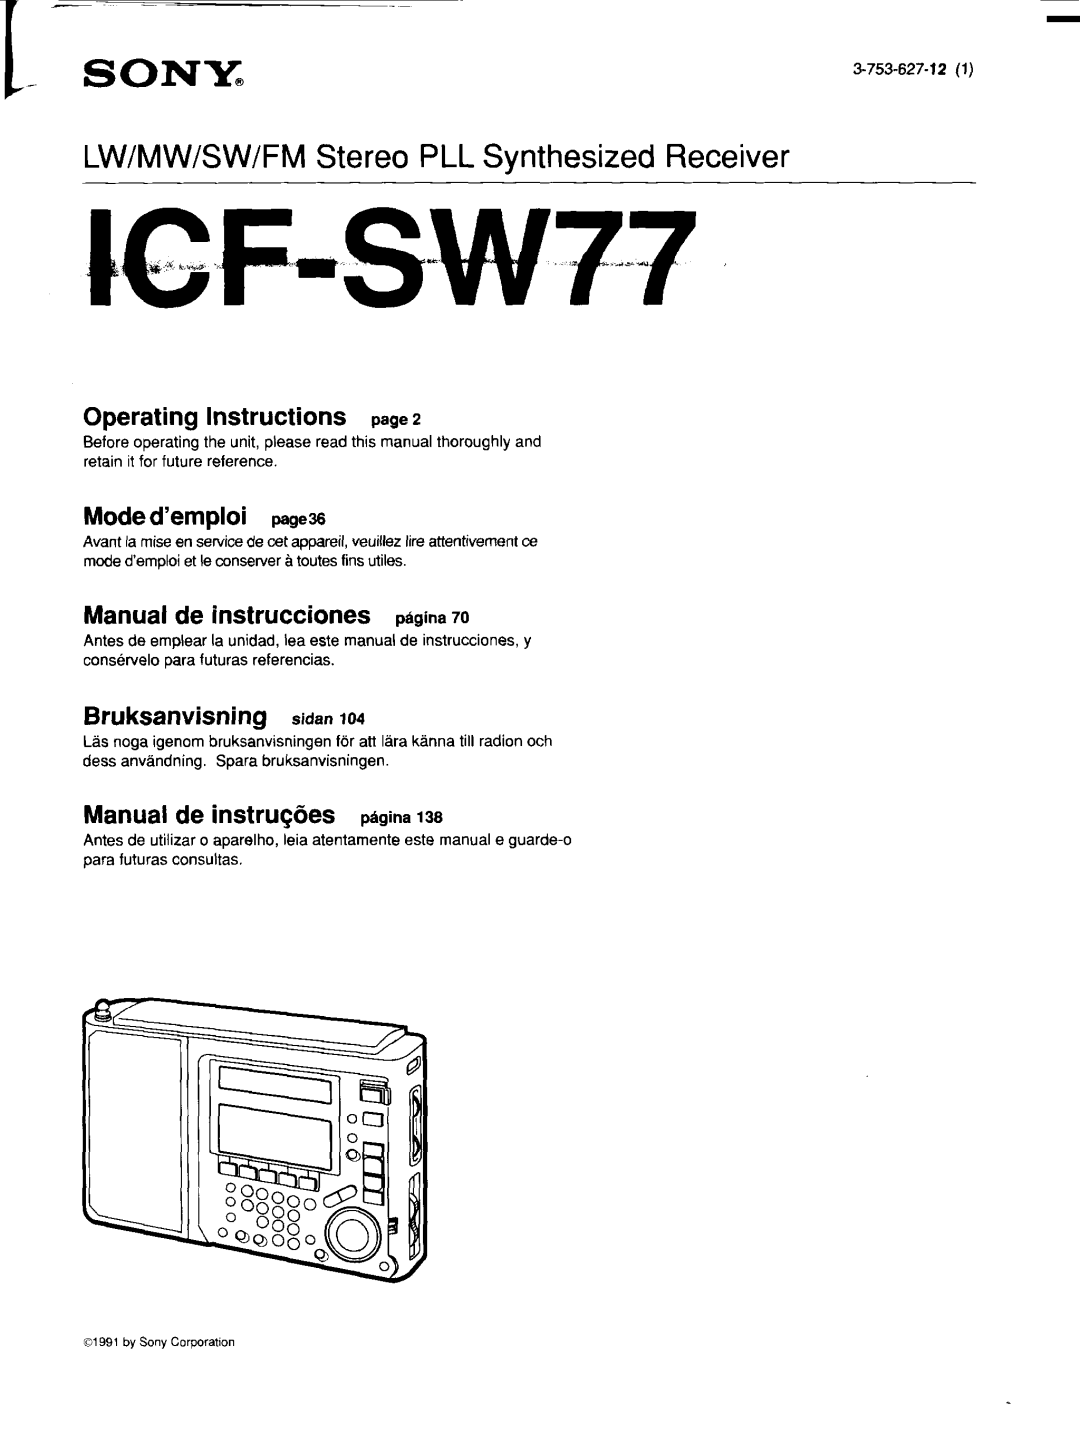 Sony manual Modification of Sony ICF-SW77, for DRM Software receiver, Date, Page 1 of 